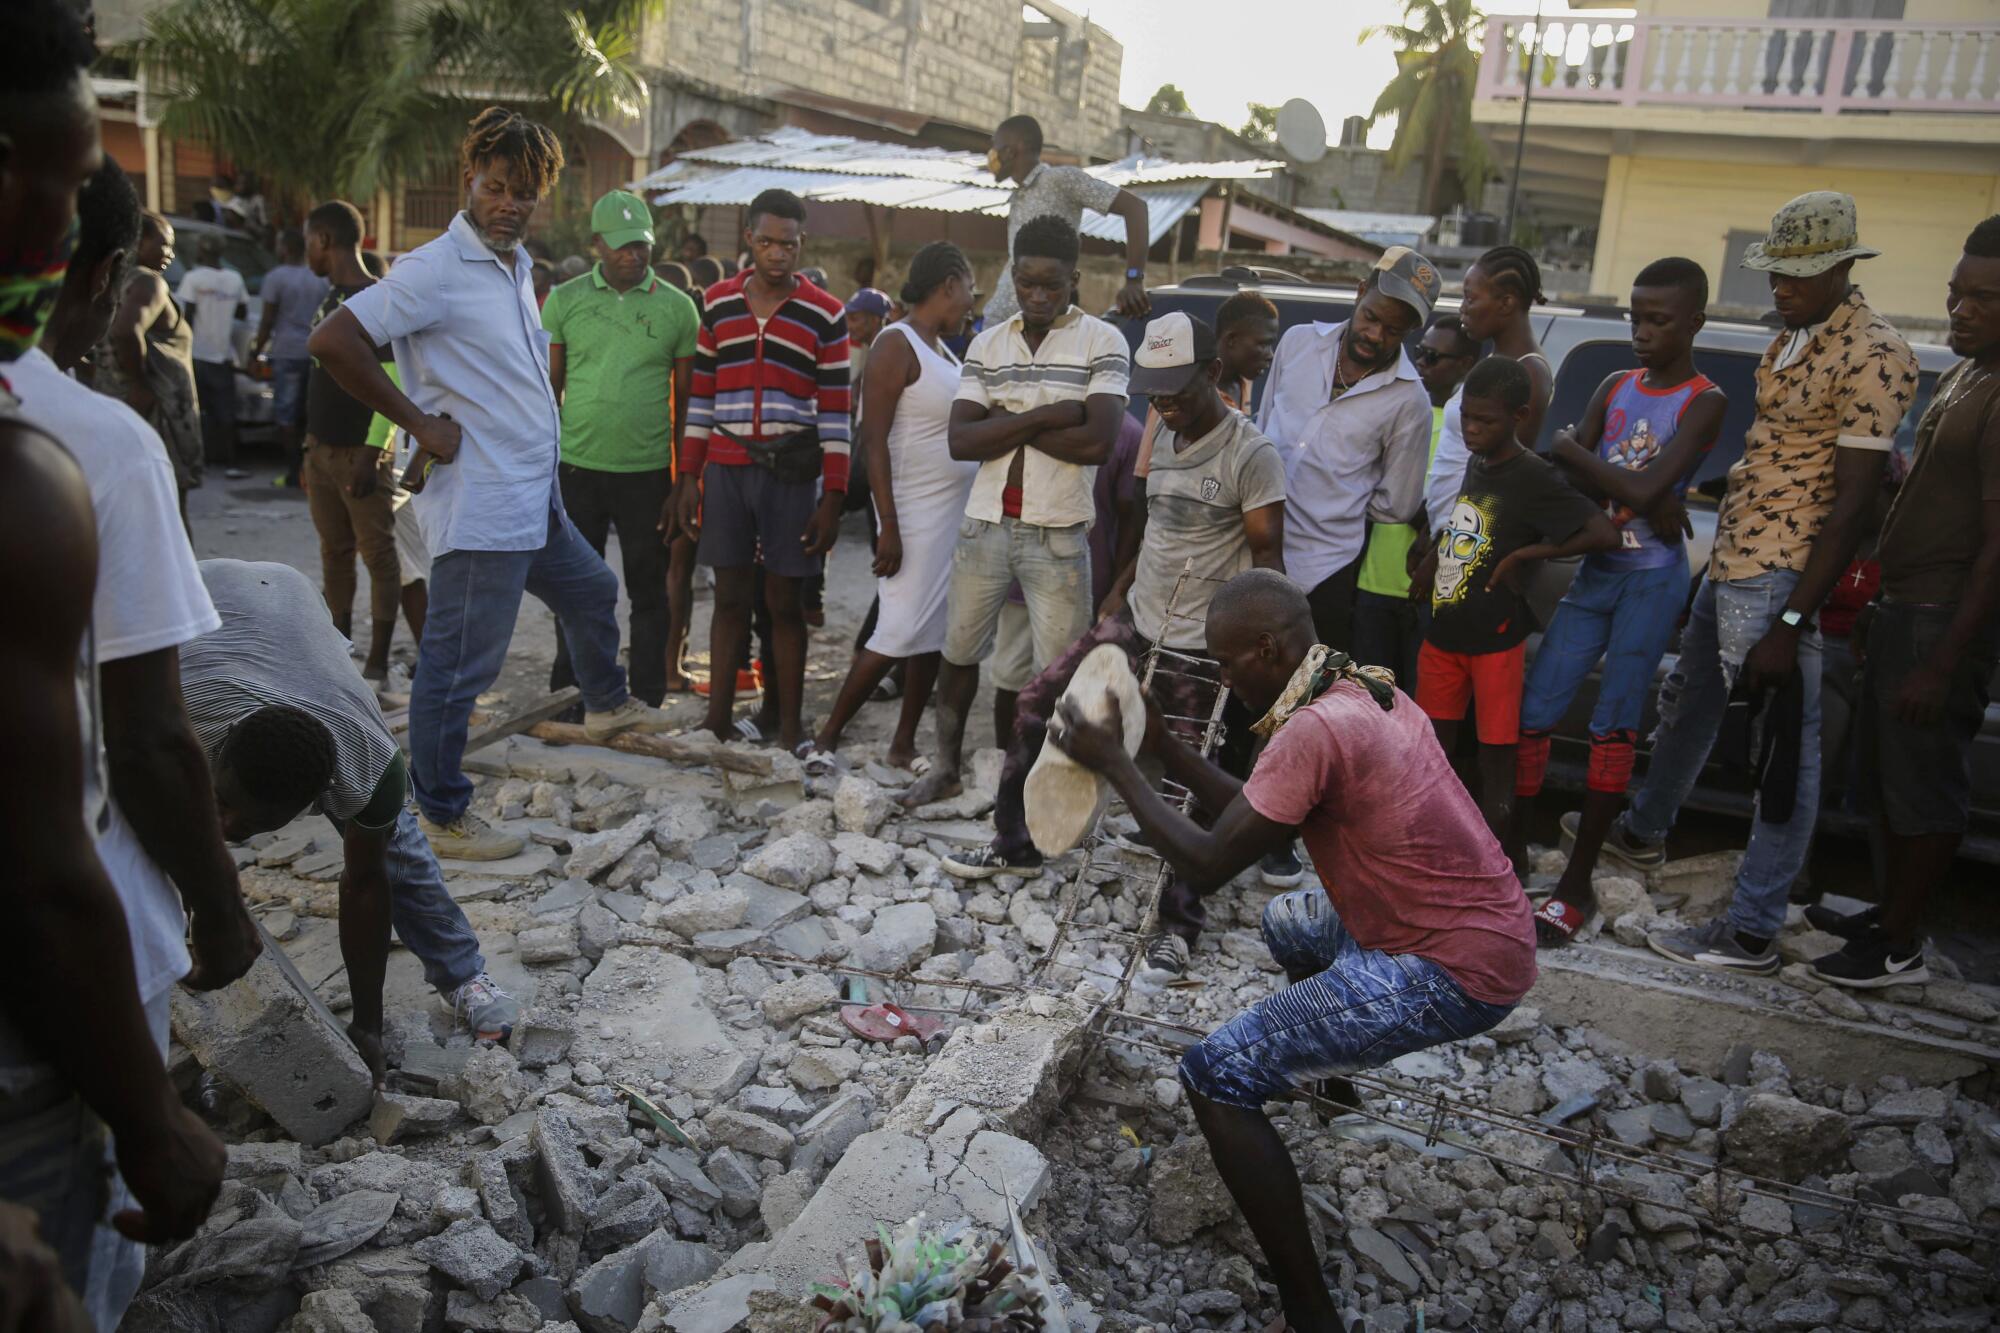 A man digs with a stone through the rubble of a house destroyed by an earthquake while onlookers watch